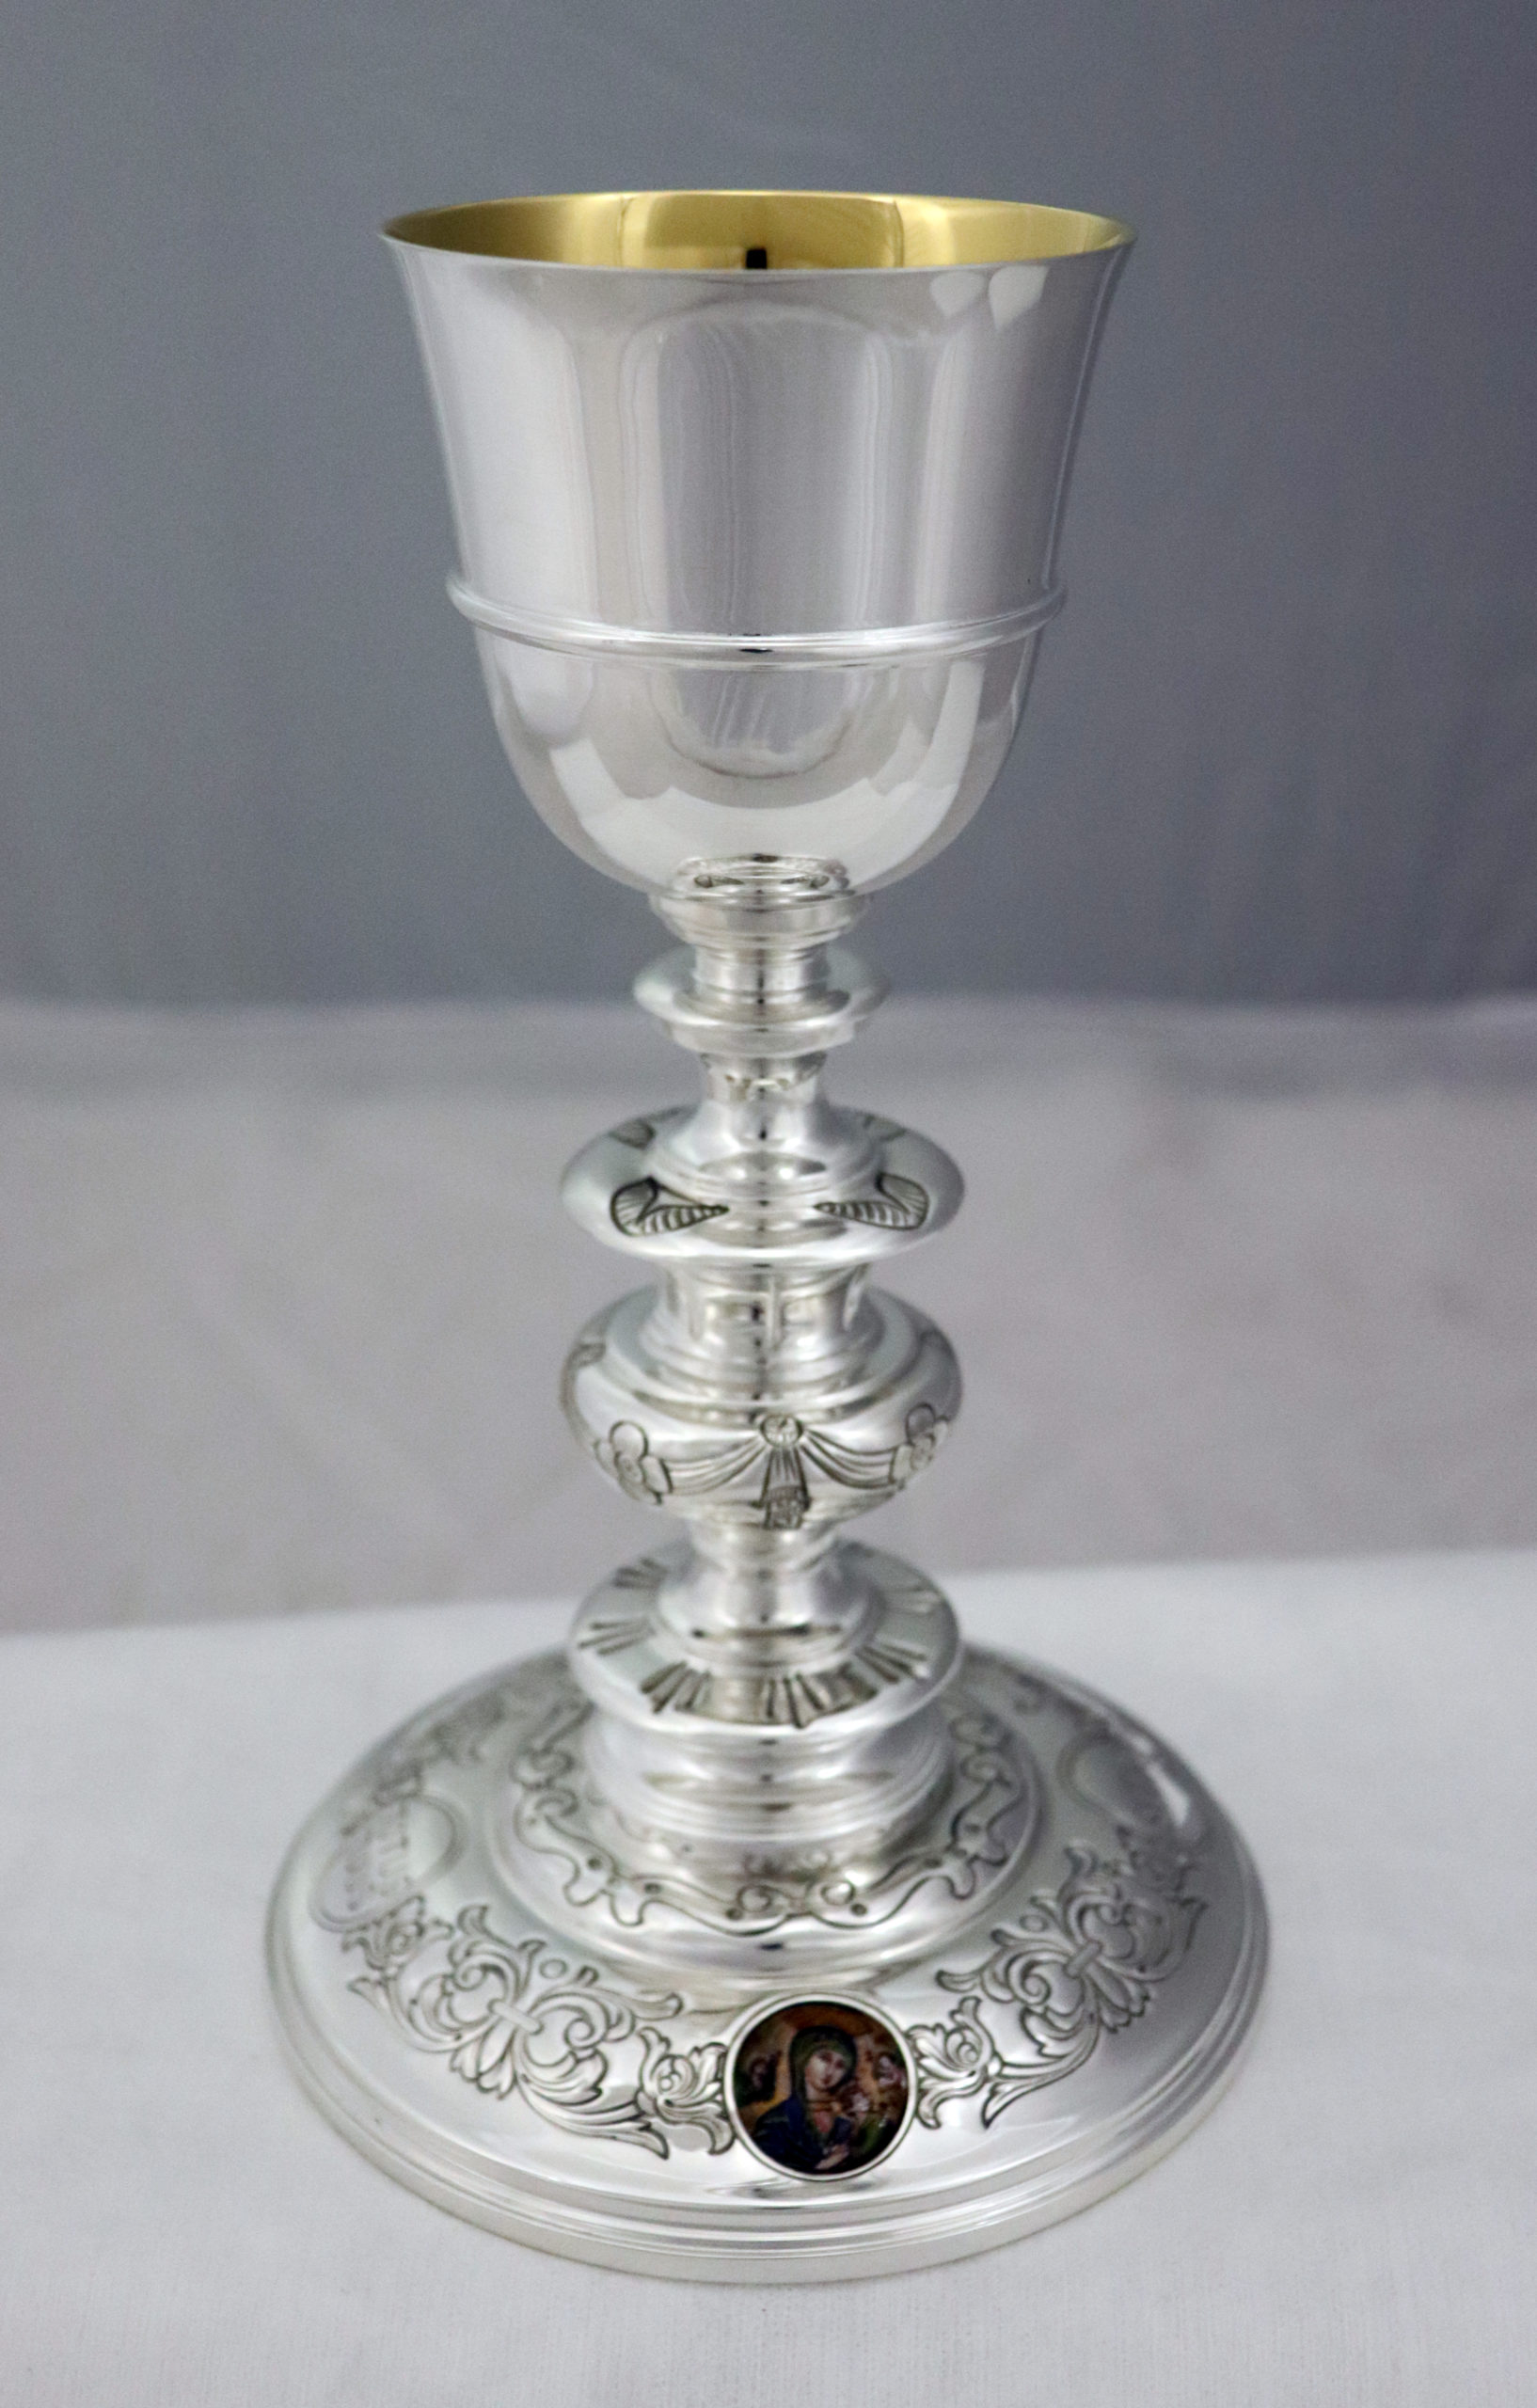 Chalice with special enamels representing John Paul II and Our Lady of Perpetual Help.